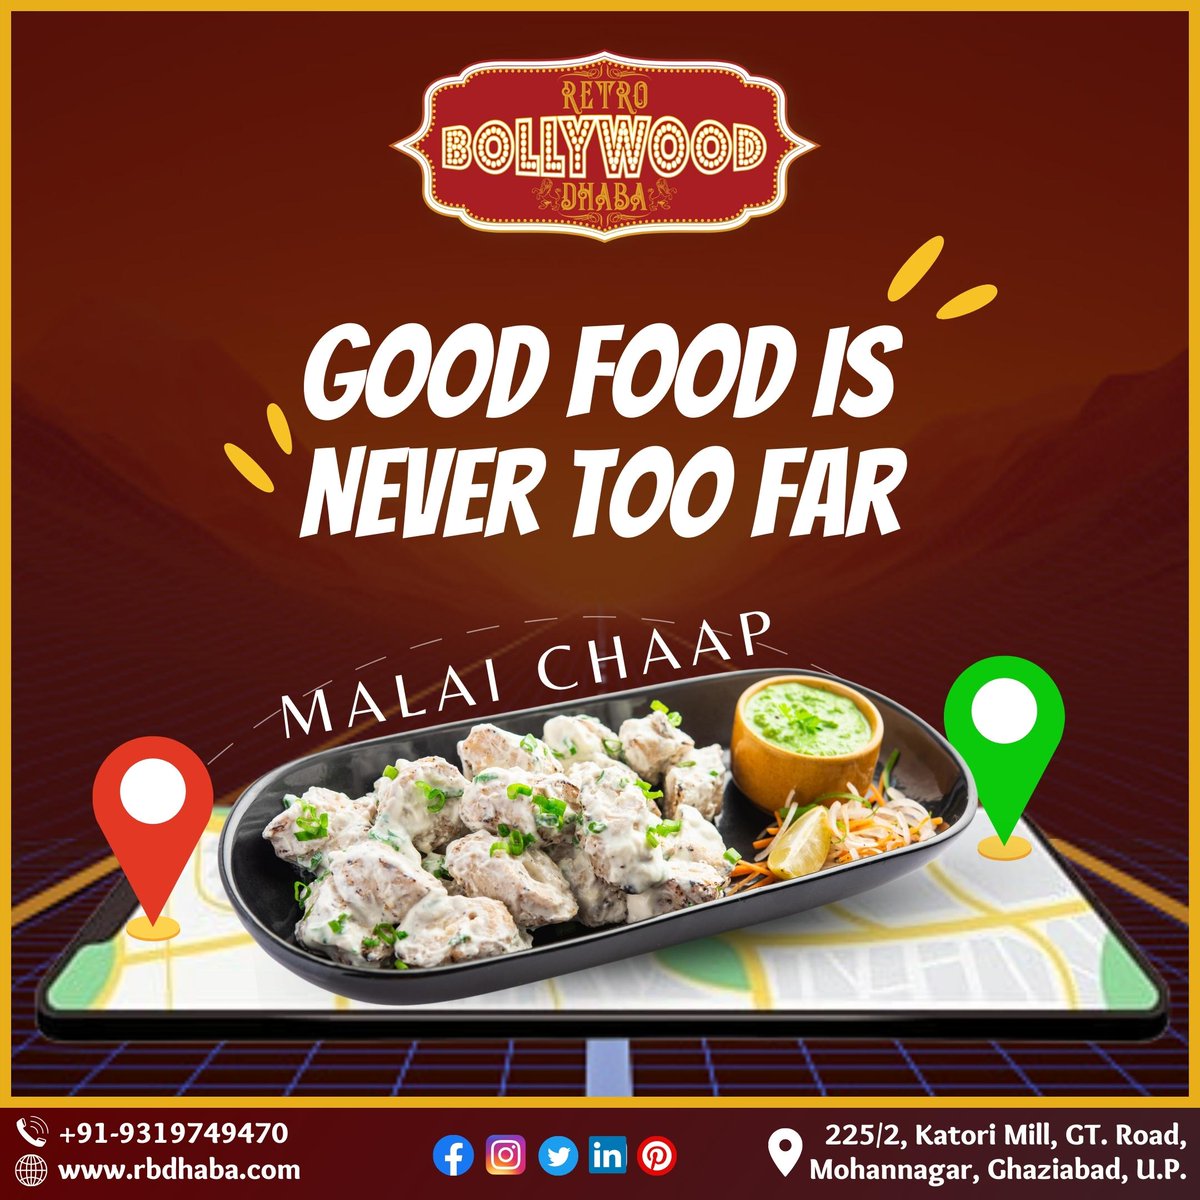 'Indulge in the creamy goodness of our Malai Chaap, a delectable fusion dish at Retro Bollywood Dhaba that will leave your taste buds wanting more!'

#RetroBollywoodDhaba #MalaiChaap #CreamyDelight #FusionFood #Foodies #FoodLovers #IndianCuisine